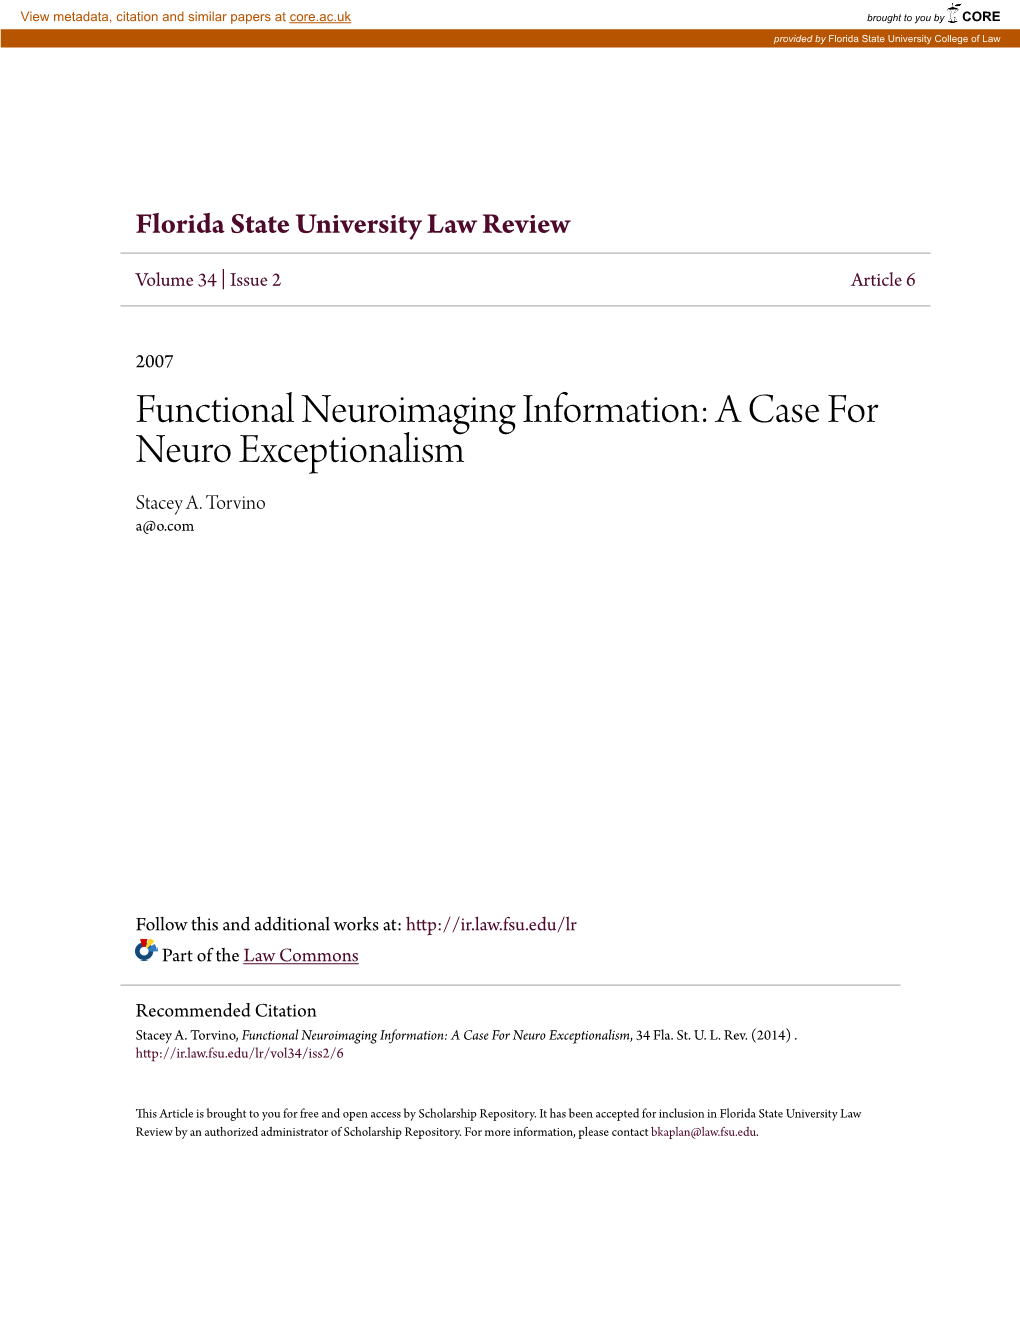 Functional Neuroimaging Information: a Case for Neuro Exceptionalism Stacey A